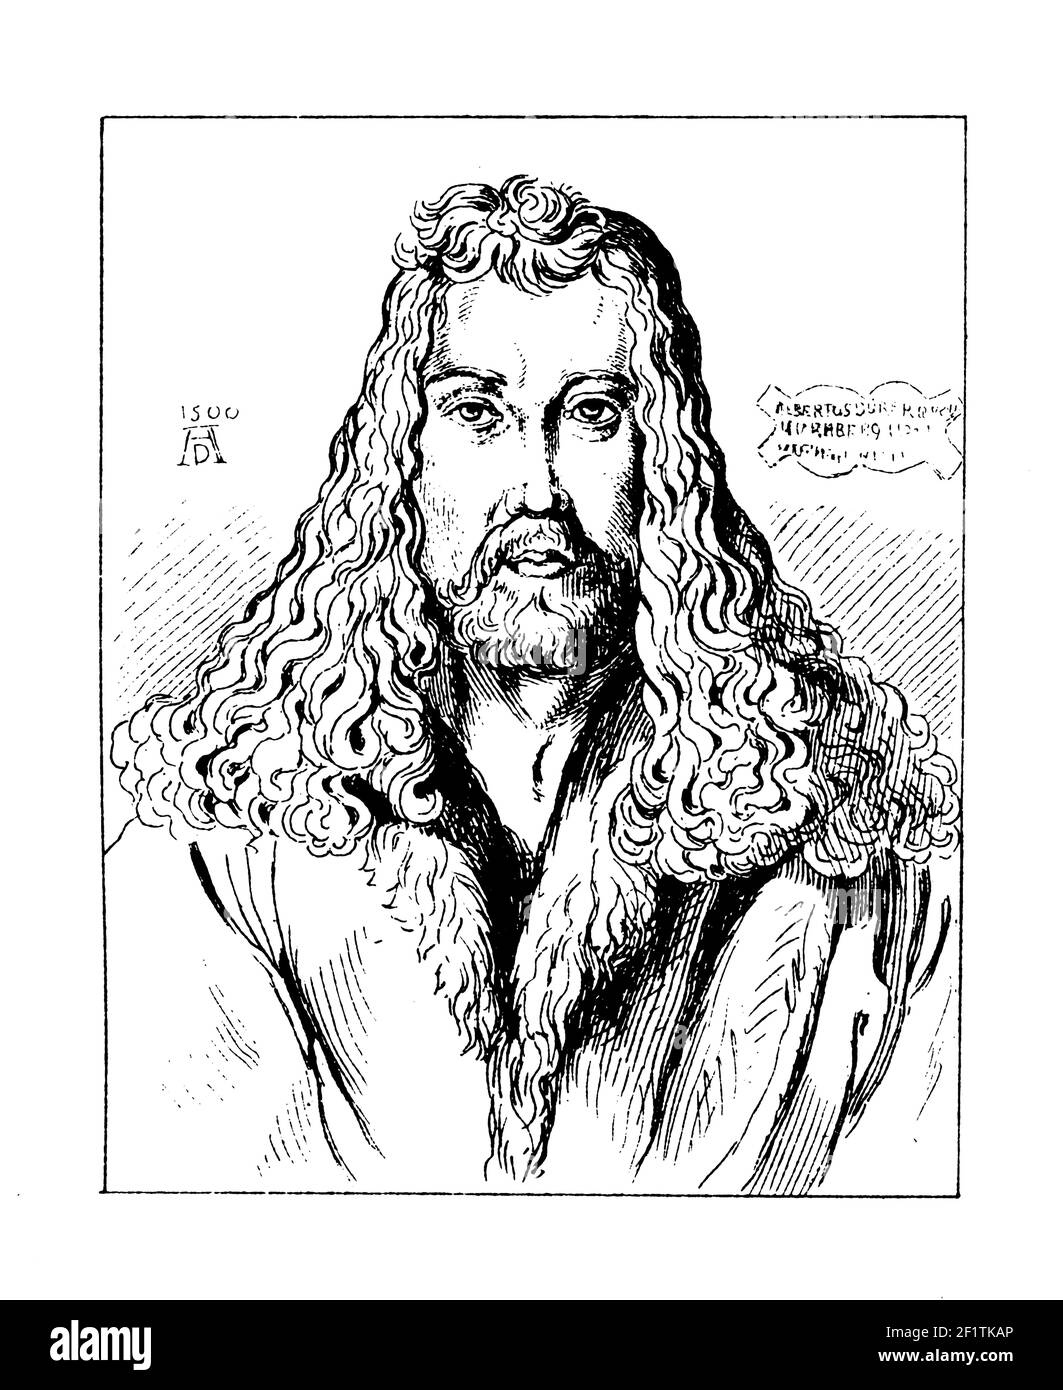 Antique illustration of a portrait of Albrecht Durer, German painter, printmaker and theorist. He was born on May 21, 1471 in Nuremberg, Holy Roman Em Stock Photo